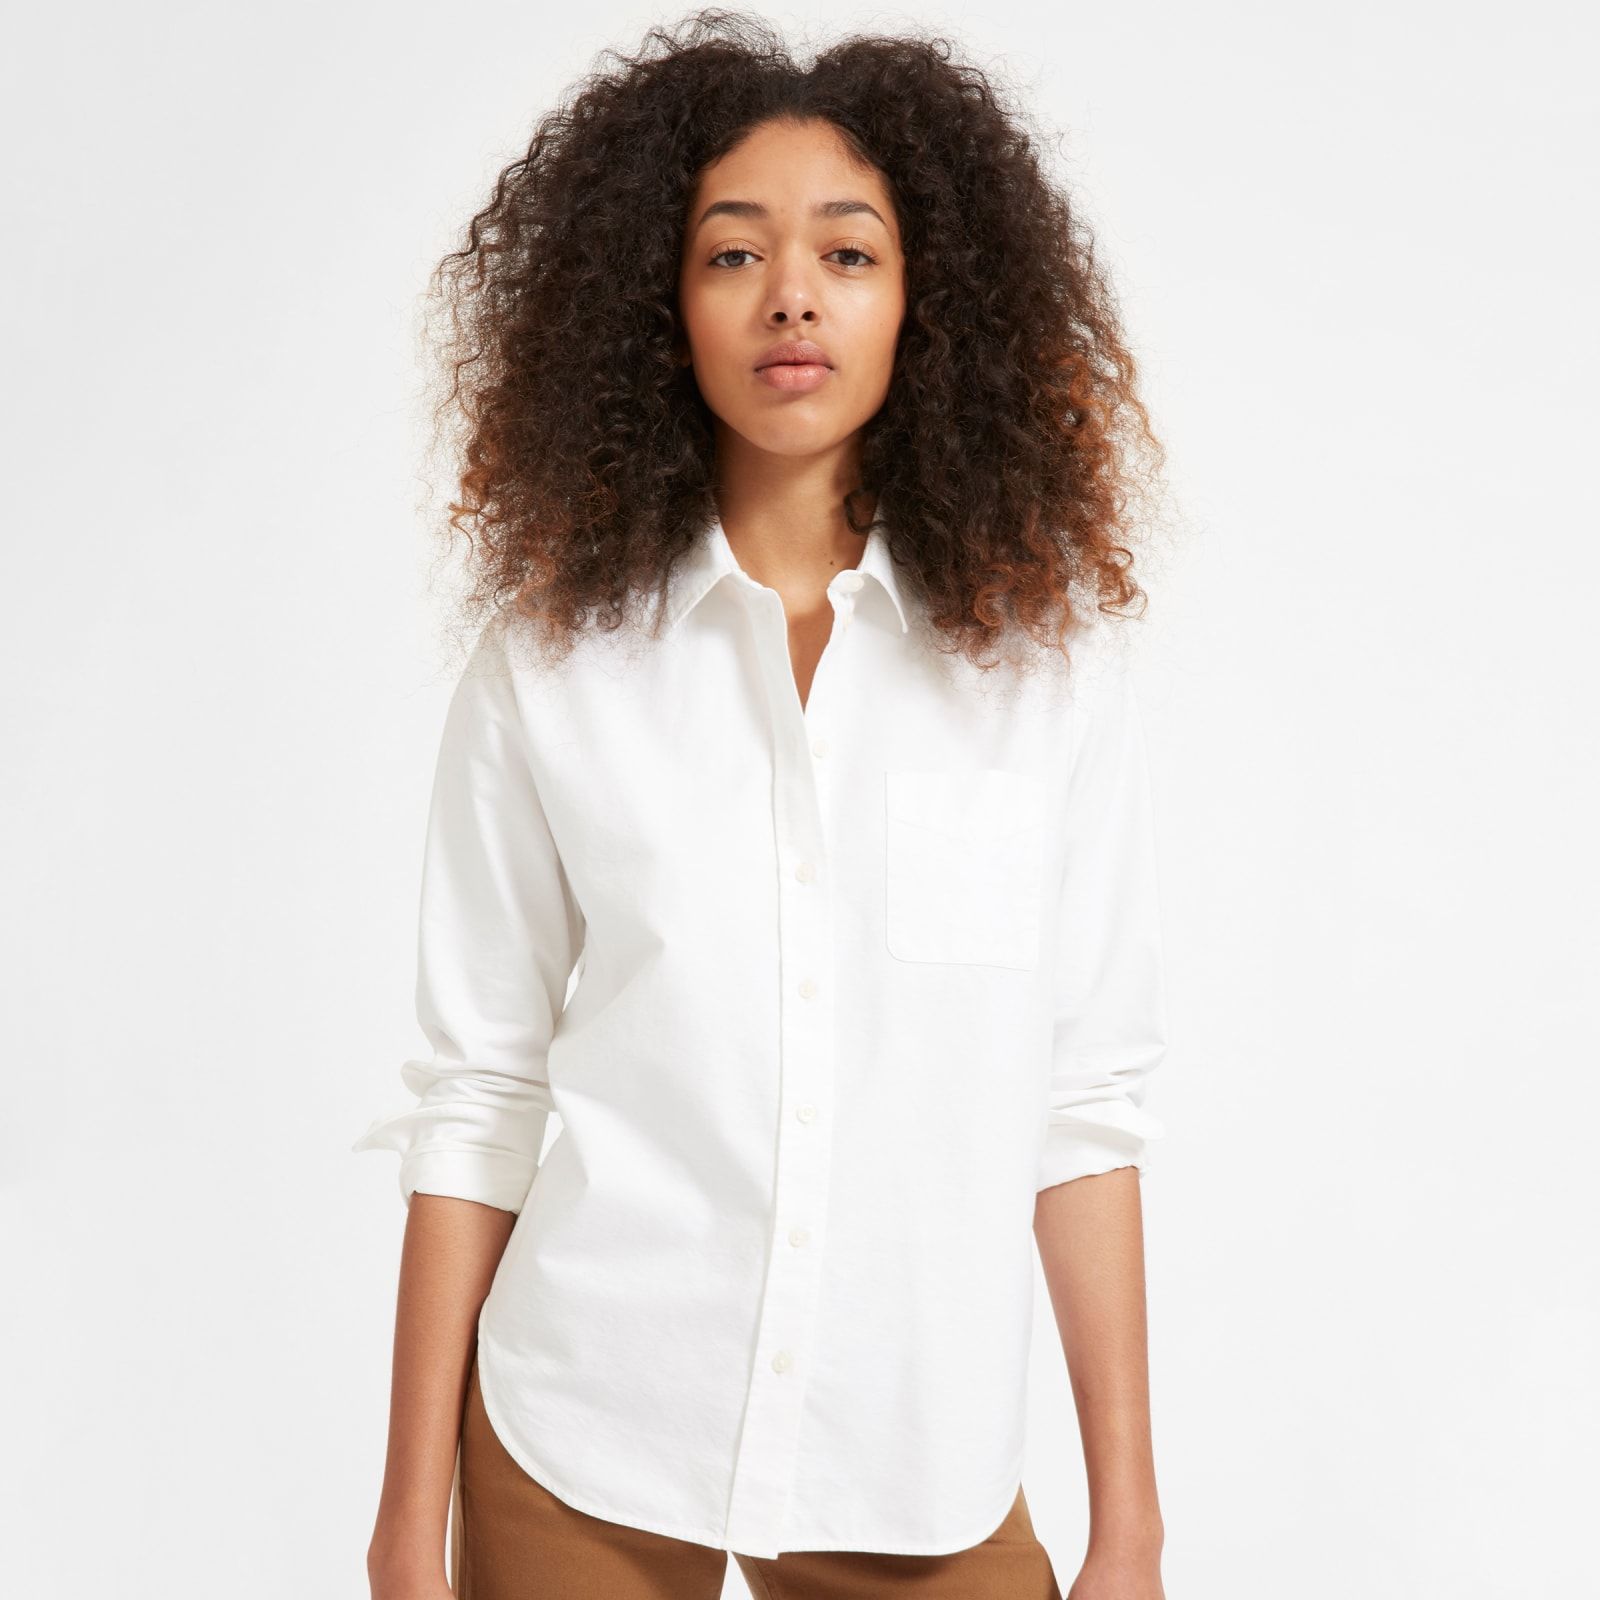 Women's Japanese Oxford Shirt by Everlane in White, Size 10 | Everlane